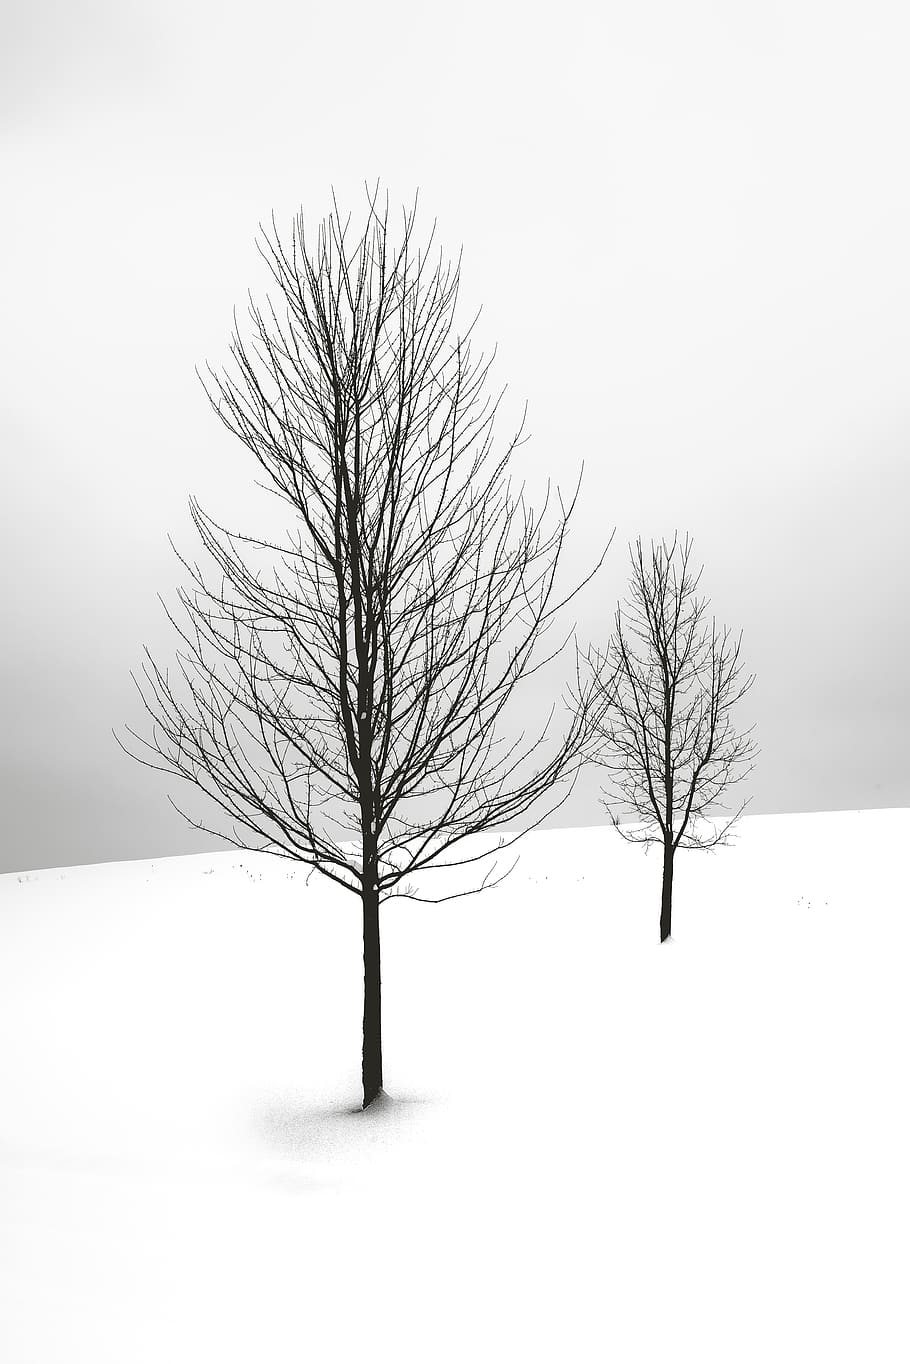 Two Bare Trees, black and white, cold, daylight, daytime, environment, HD wallpaper